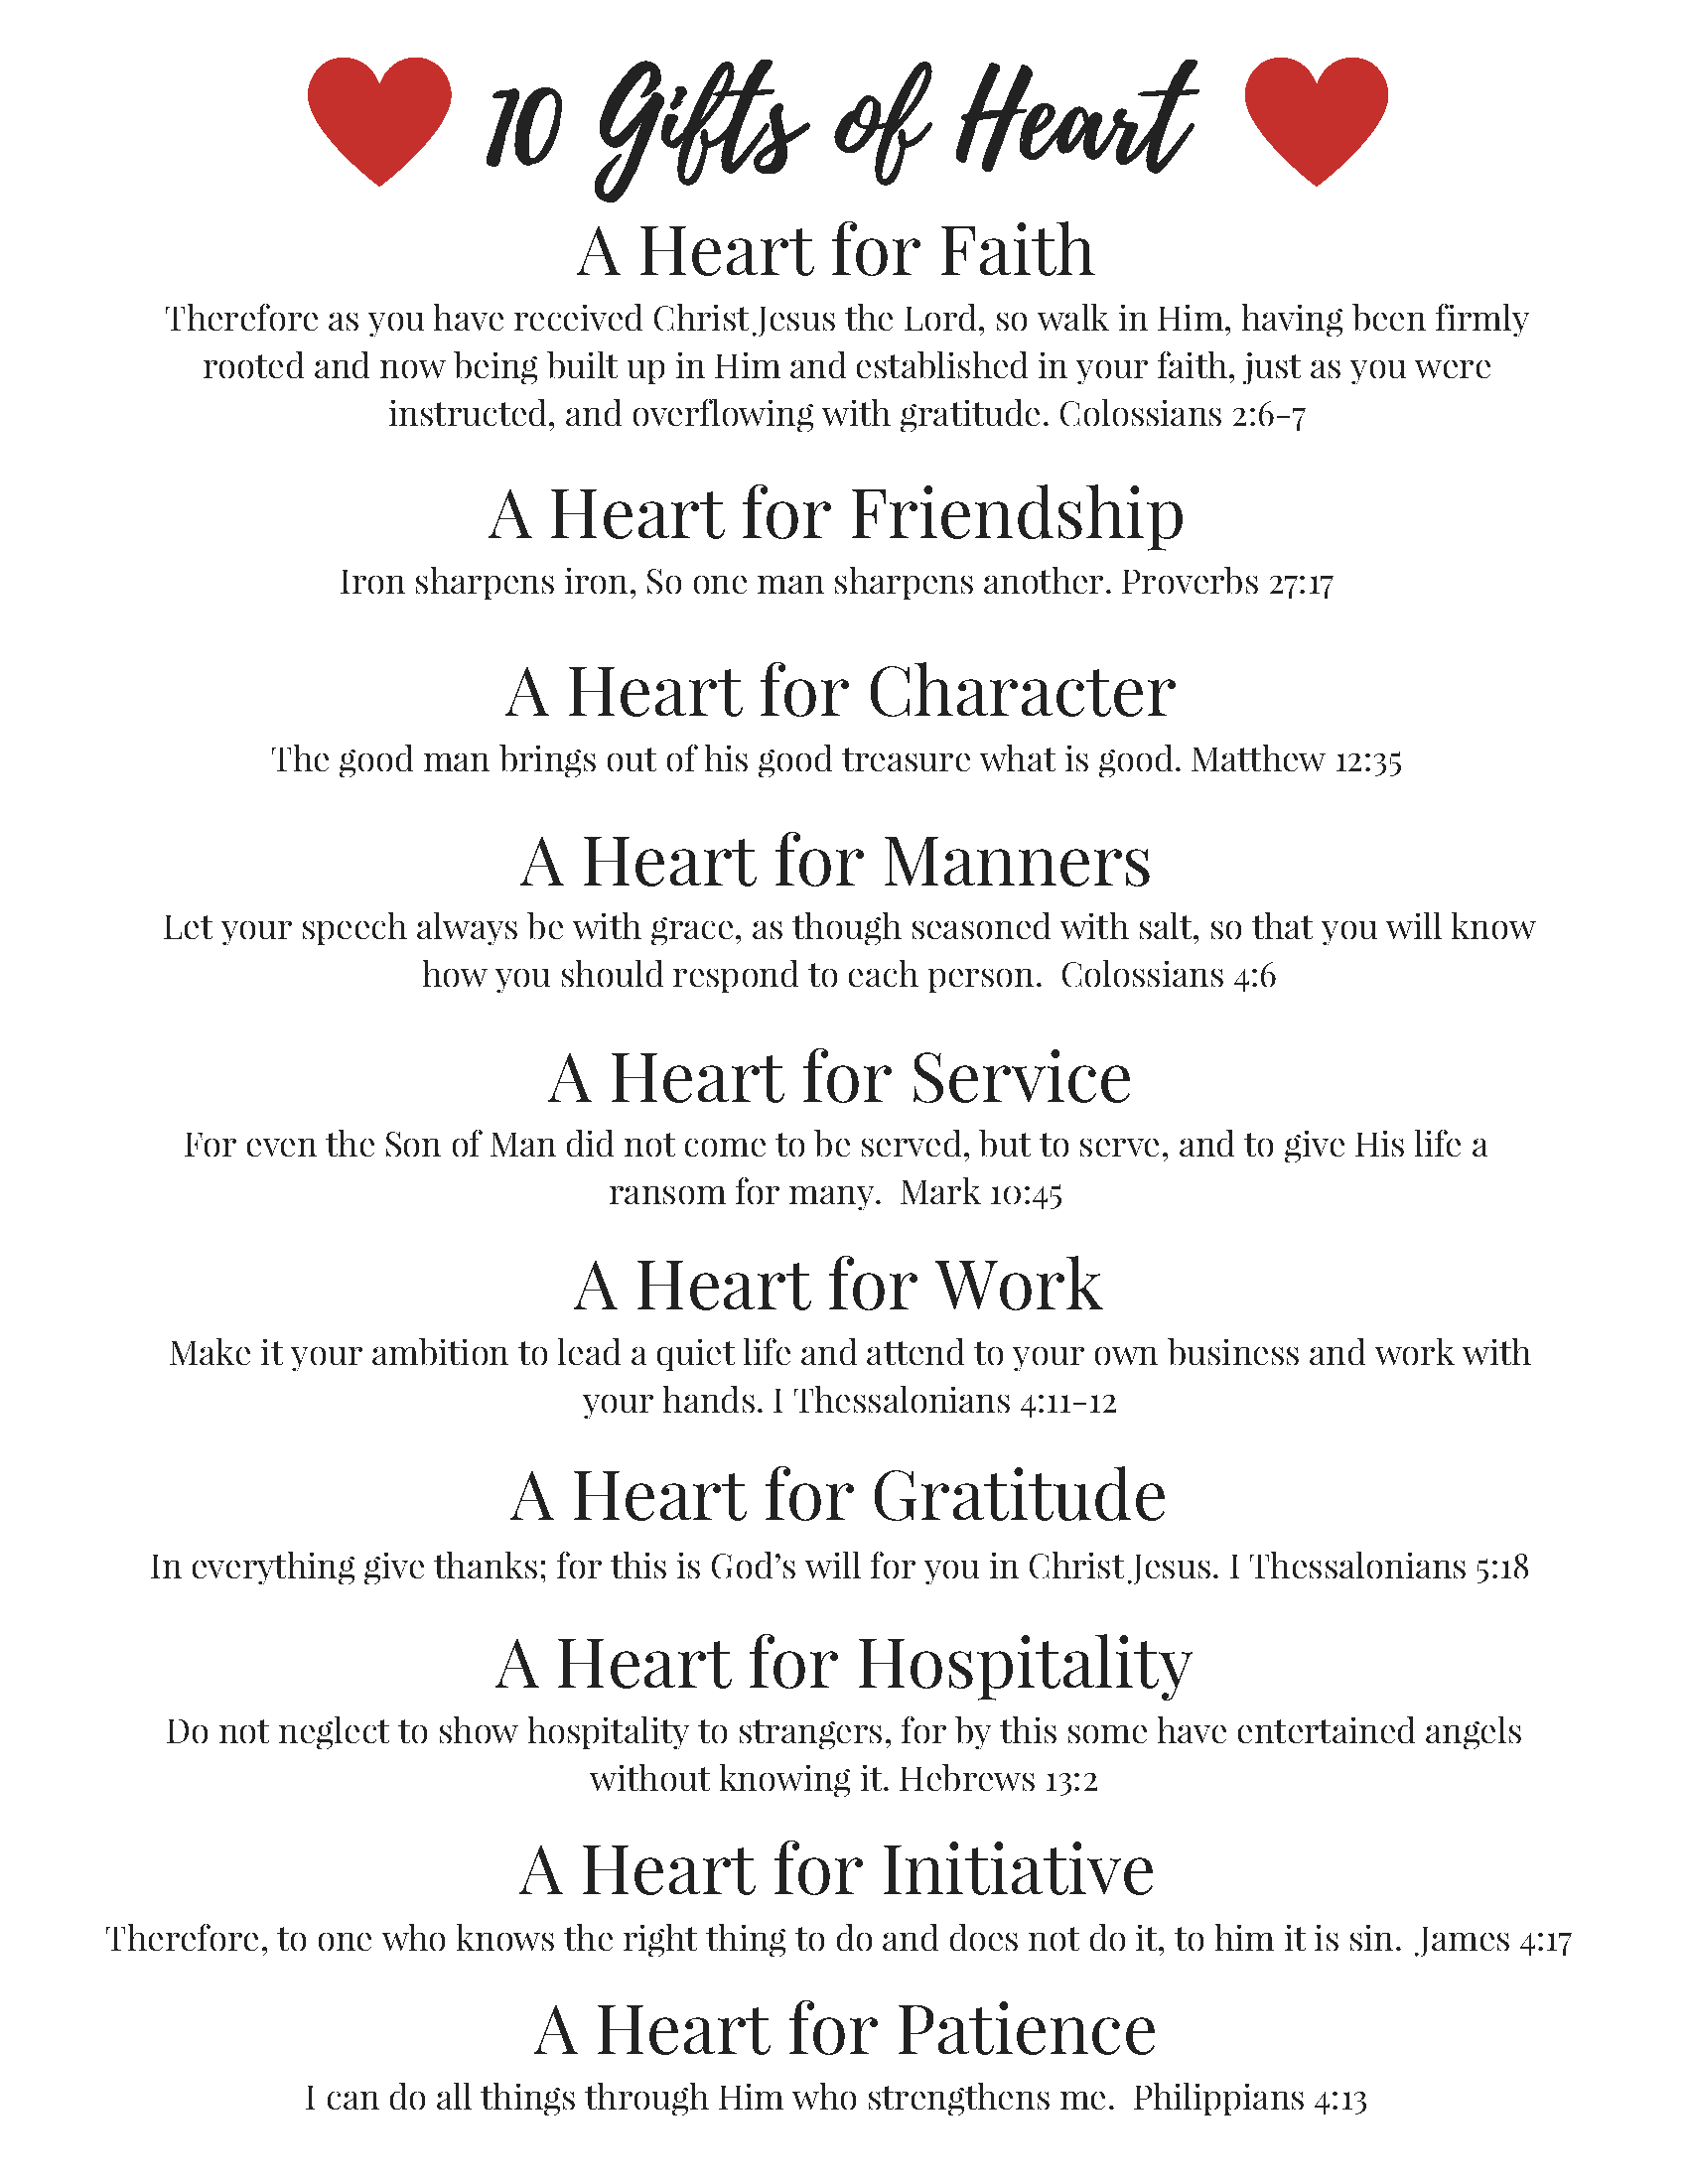 LWS+10+Gifts+of+Heart+Printable.png